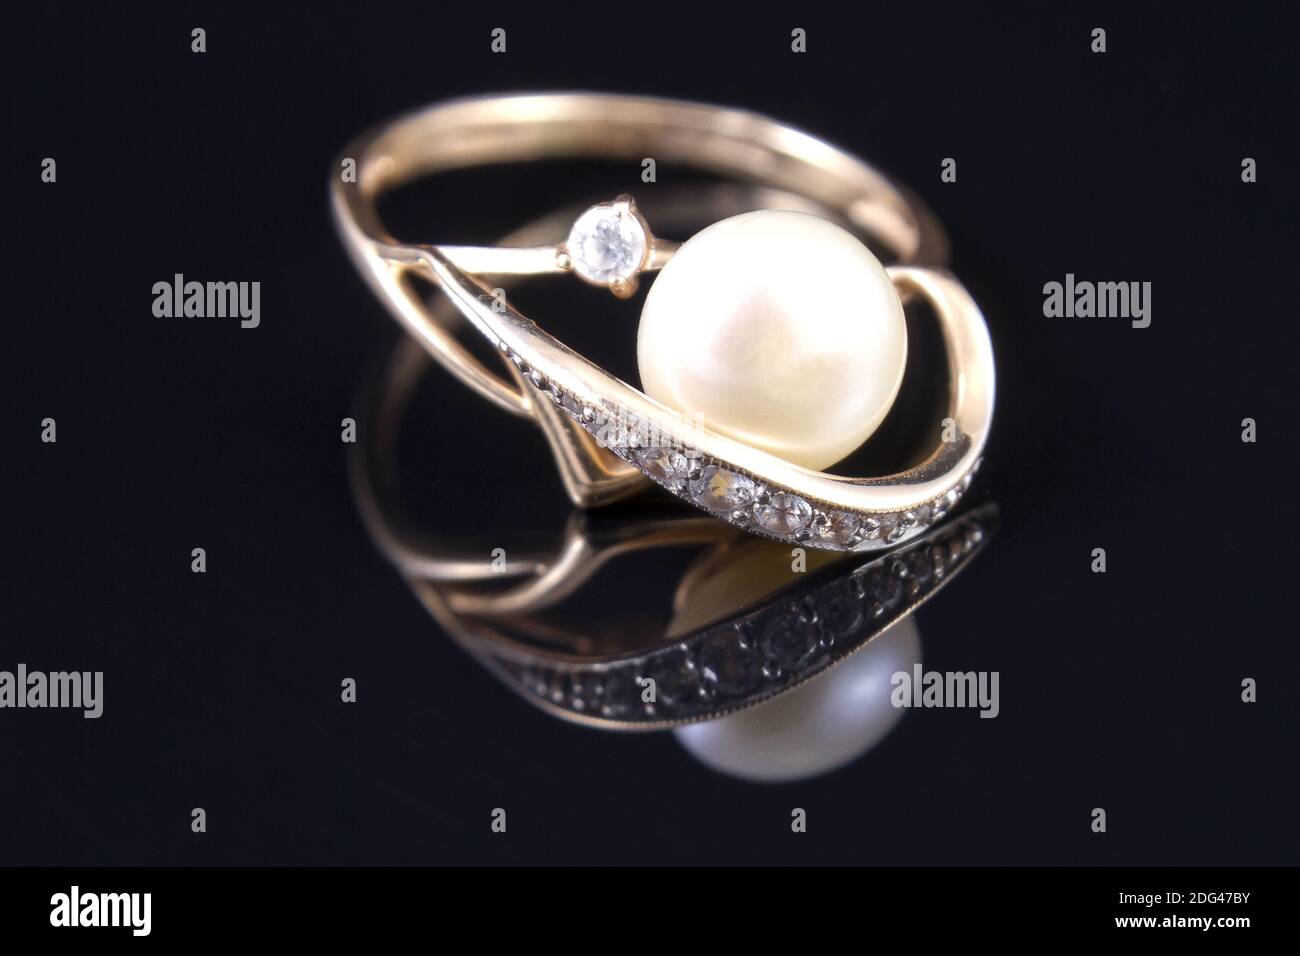 Gold ring with a pearl is reflected from the floor Stock Photo